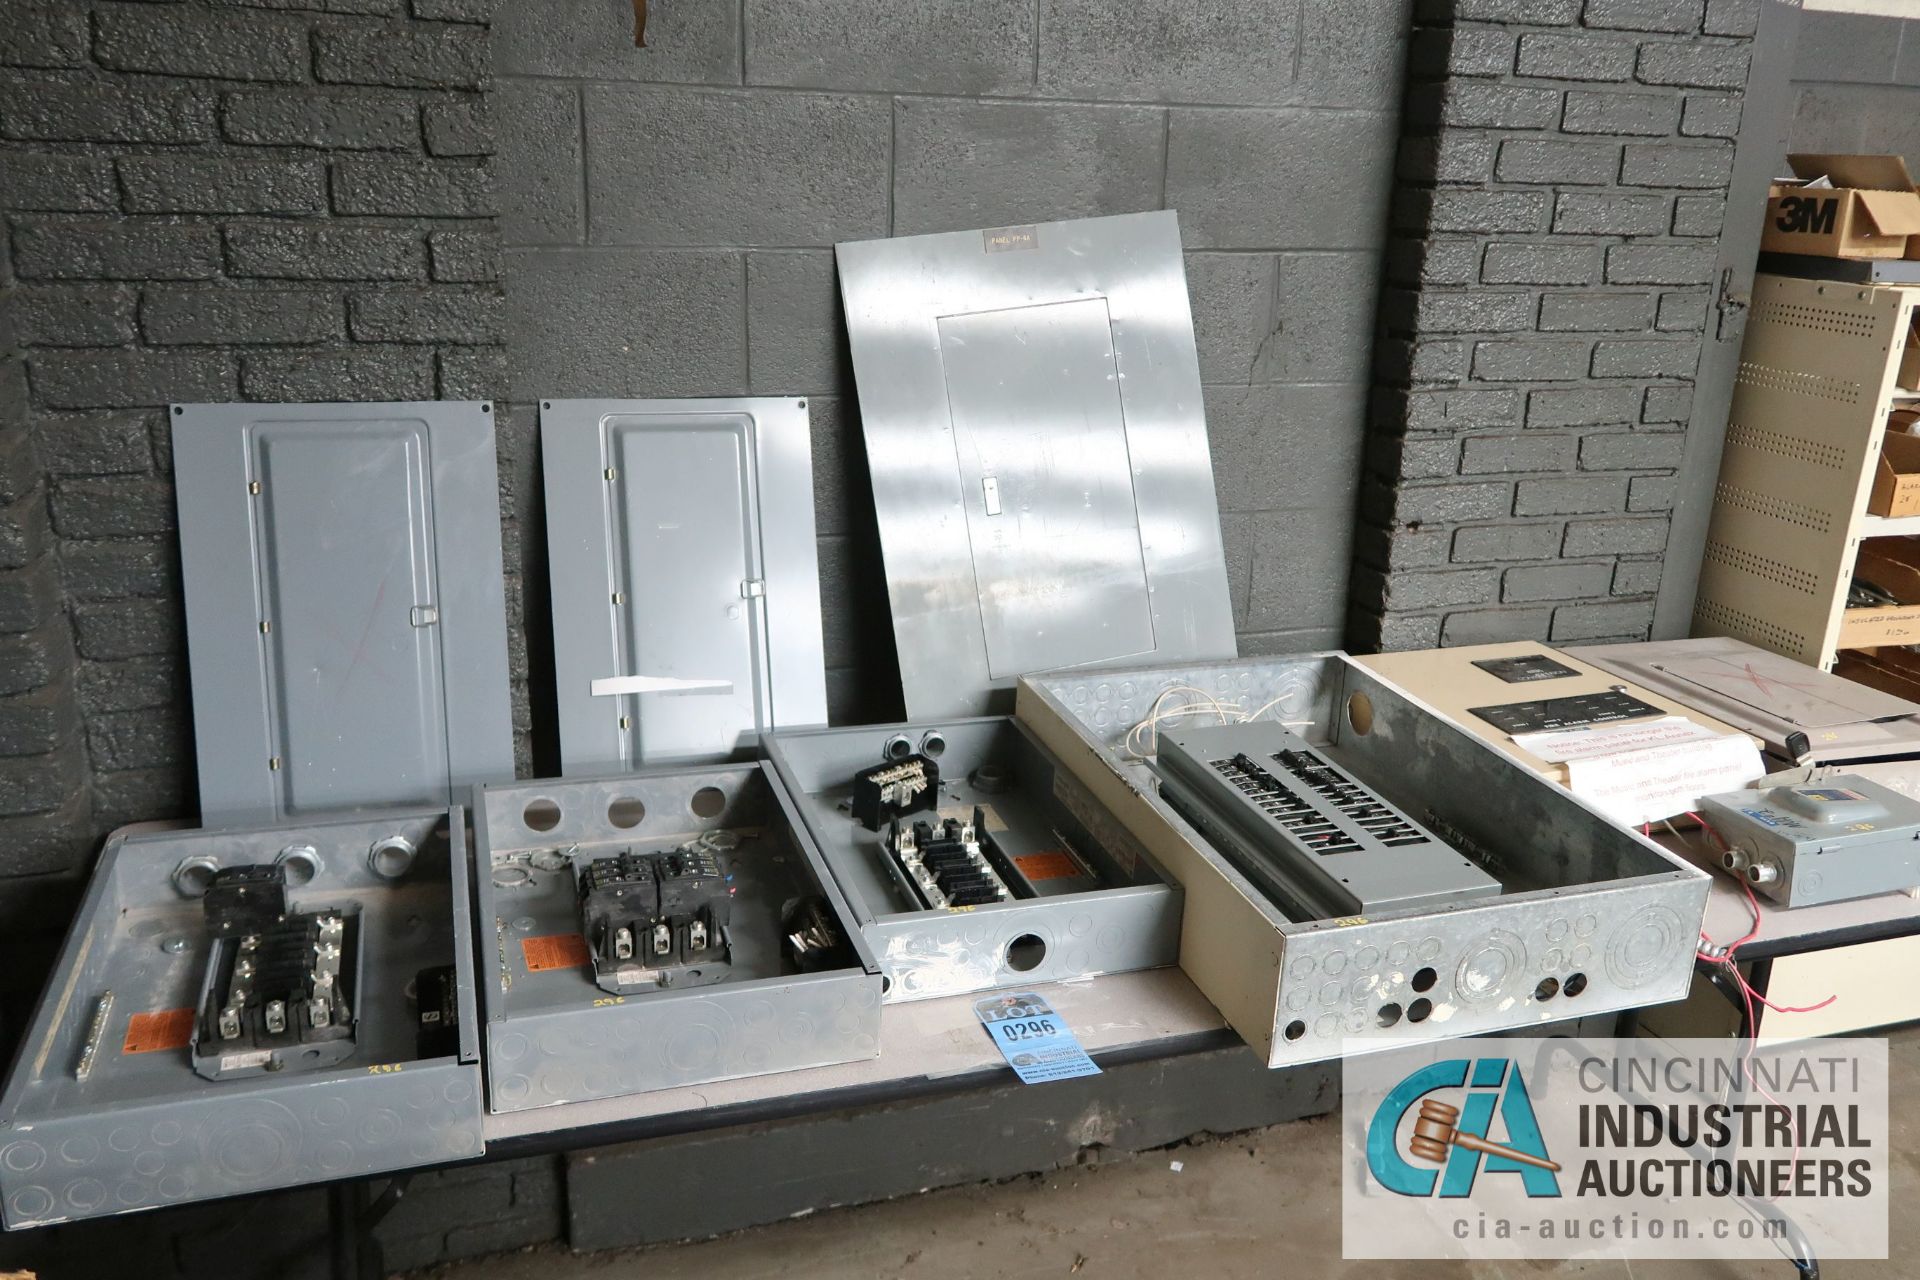 (LOT) ASSORTED ELECTRICAL ALONG THE WALL - TABLE WITH SERVICE PANELS BY SQUARE D, SHELF UNITS WITH